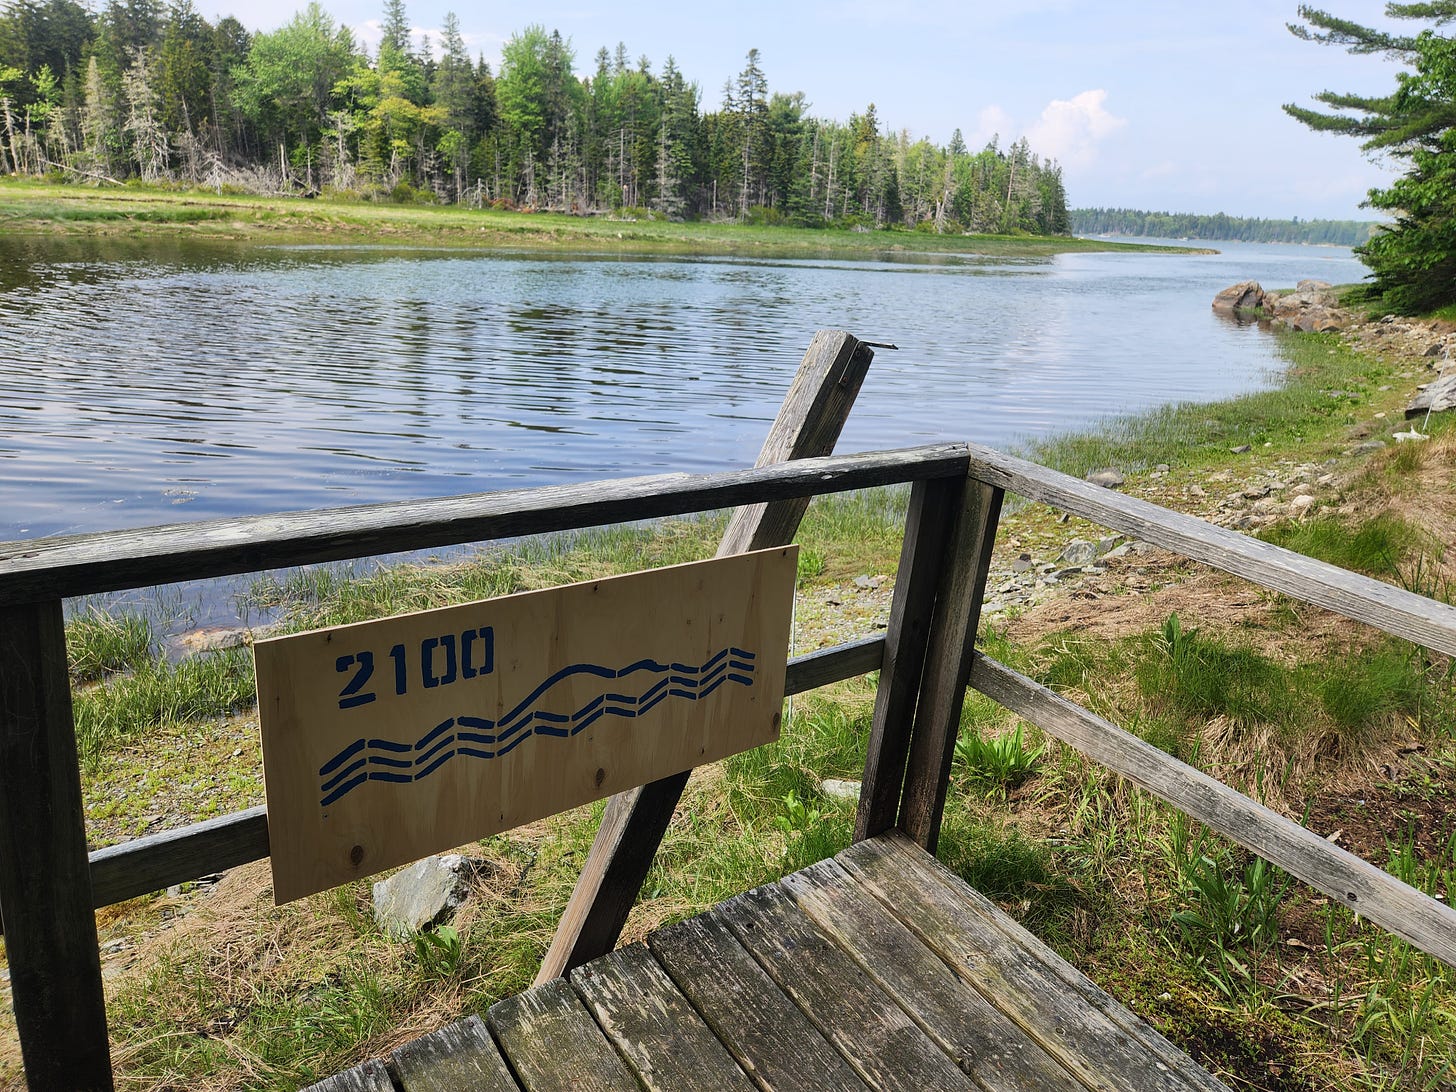 At the edge of a tidal river, a stenciled plywood sign says “2100” and shows three wavy horizonal lines, with the top line bowed upwards. The sign is installed on the railing at the end of a weathered wooden boardwalk overlooking the river.